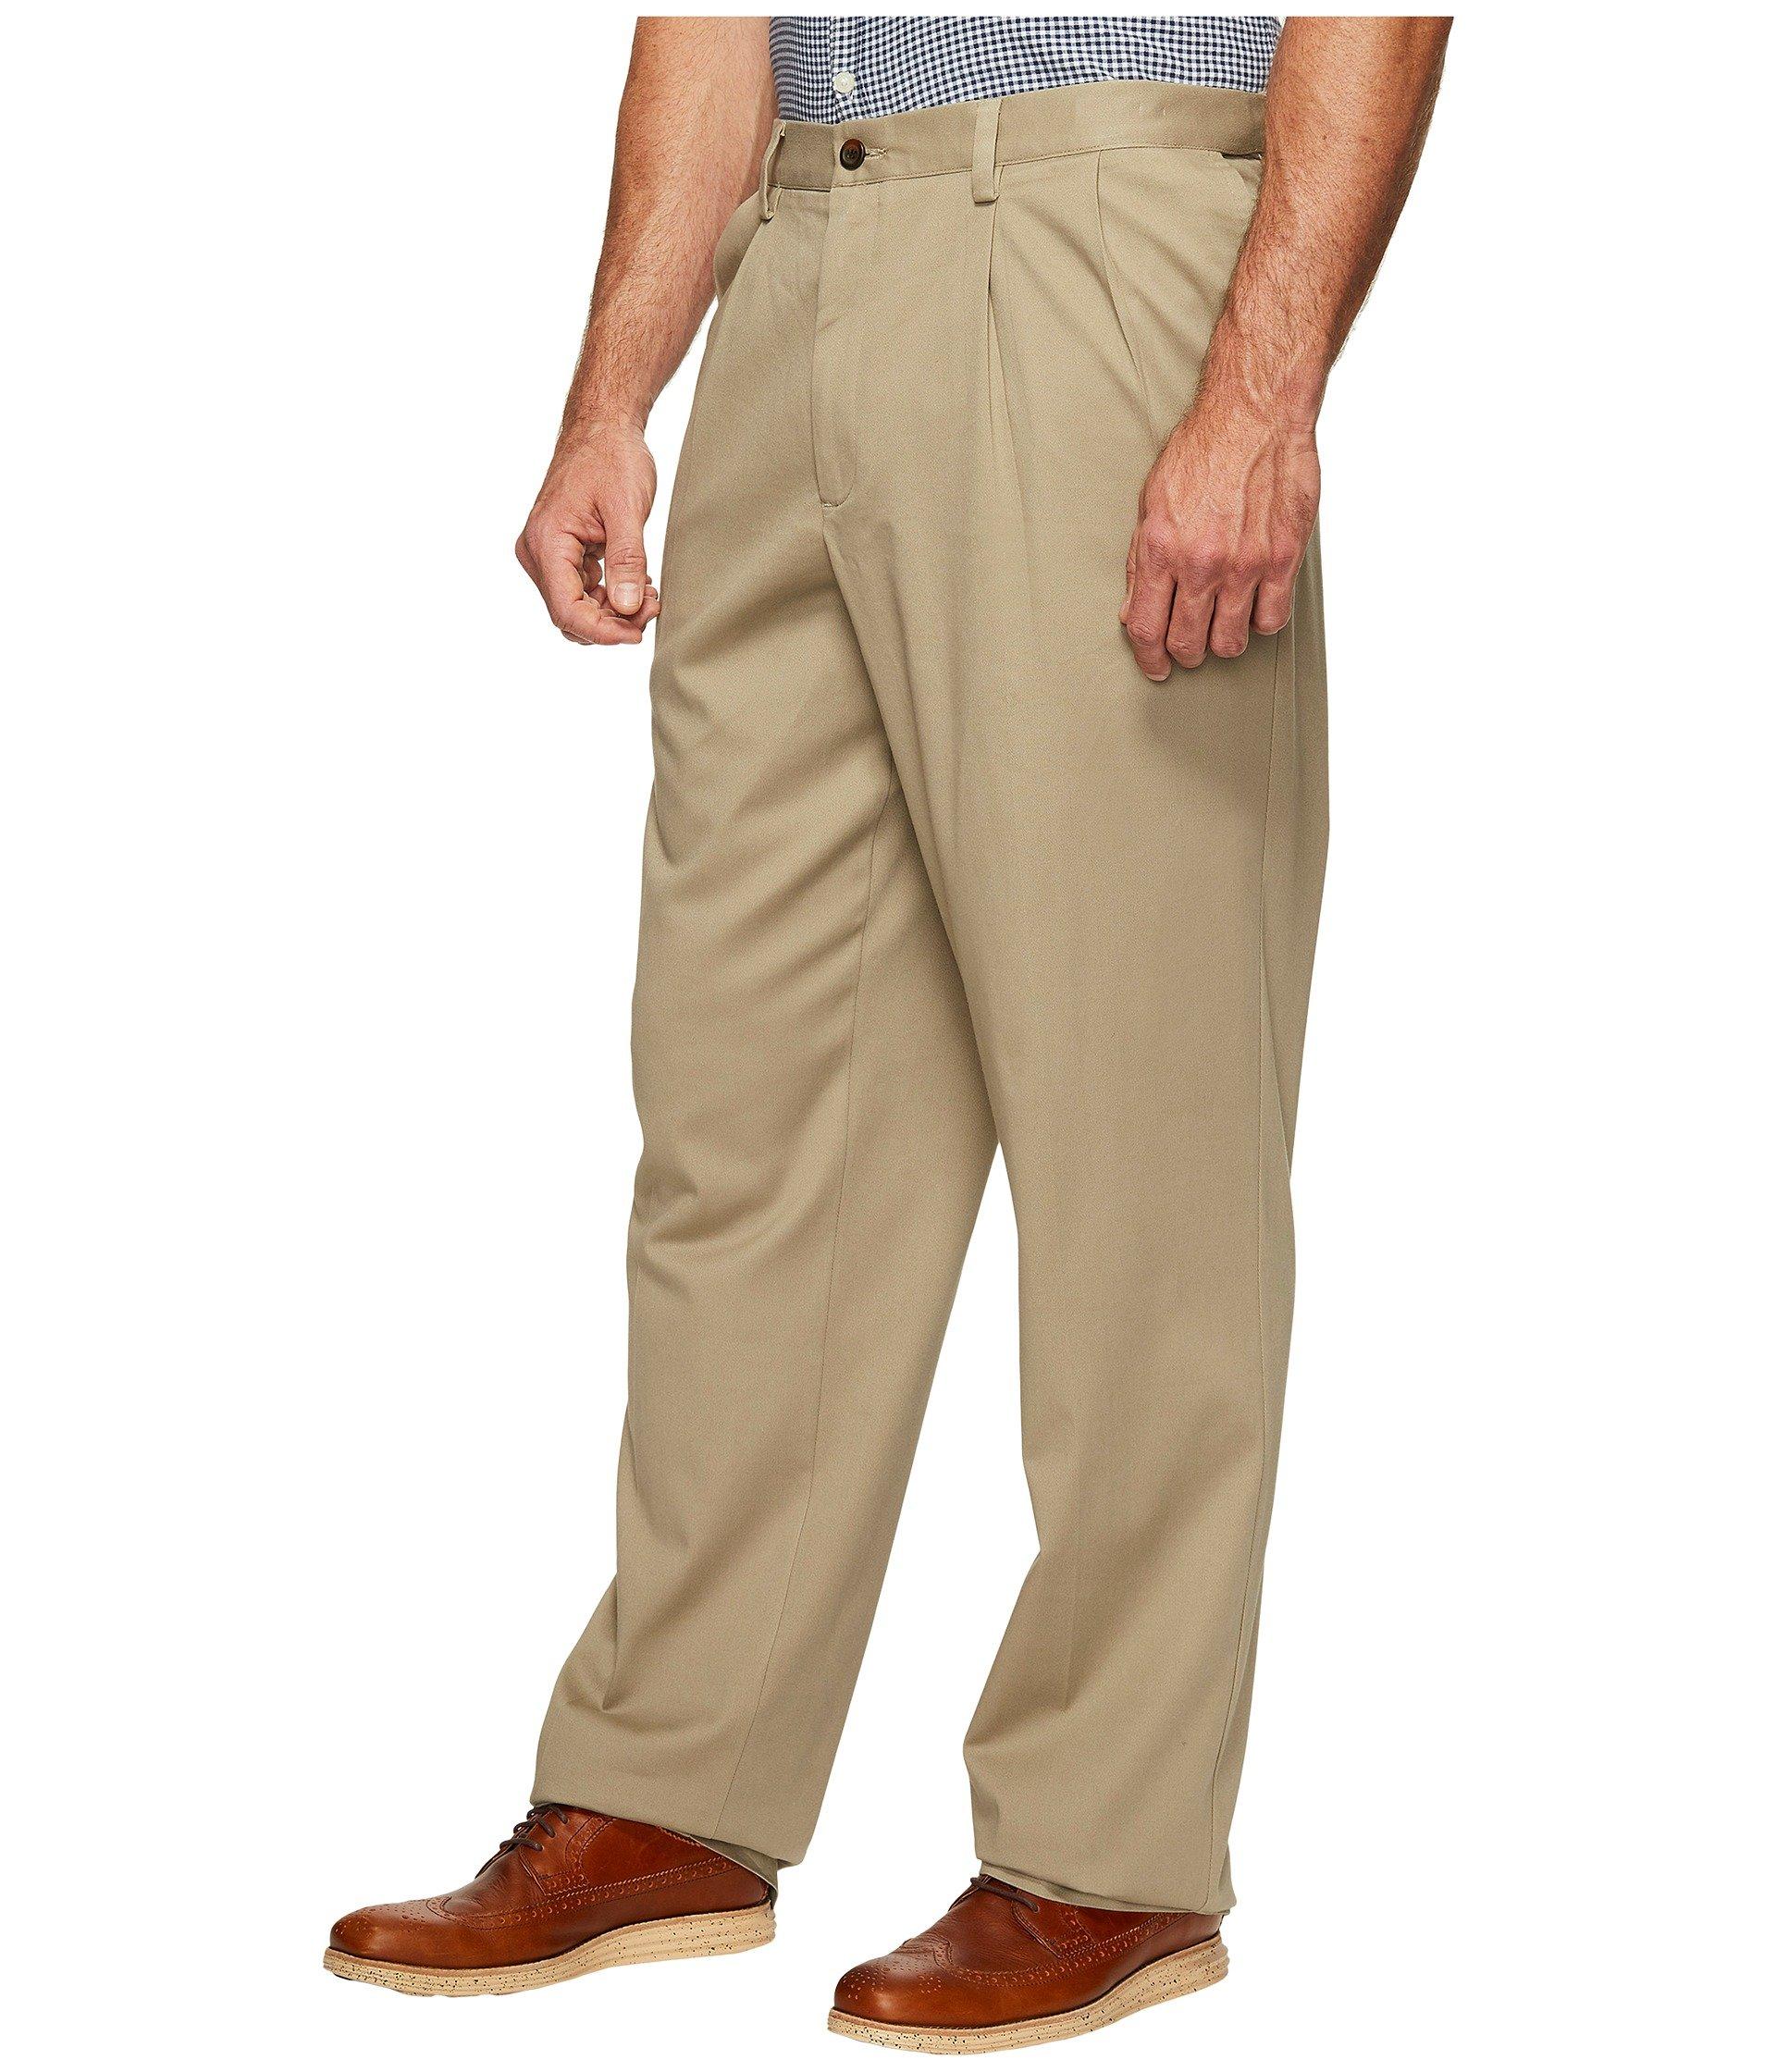 Dockers Cotton Big Tall Easy Khaki Pleated Pants in Natural for Men - Lyst